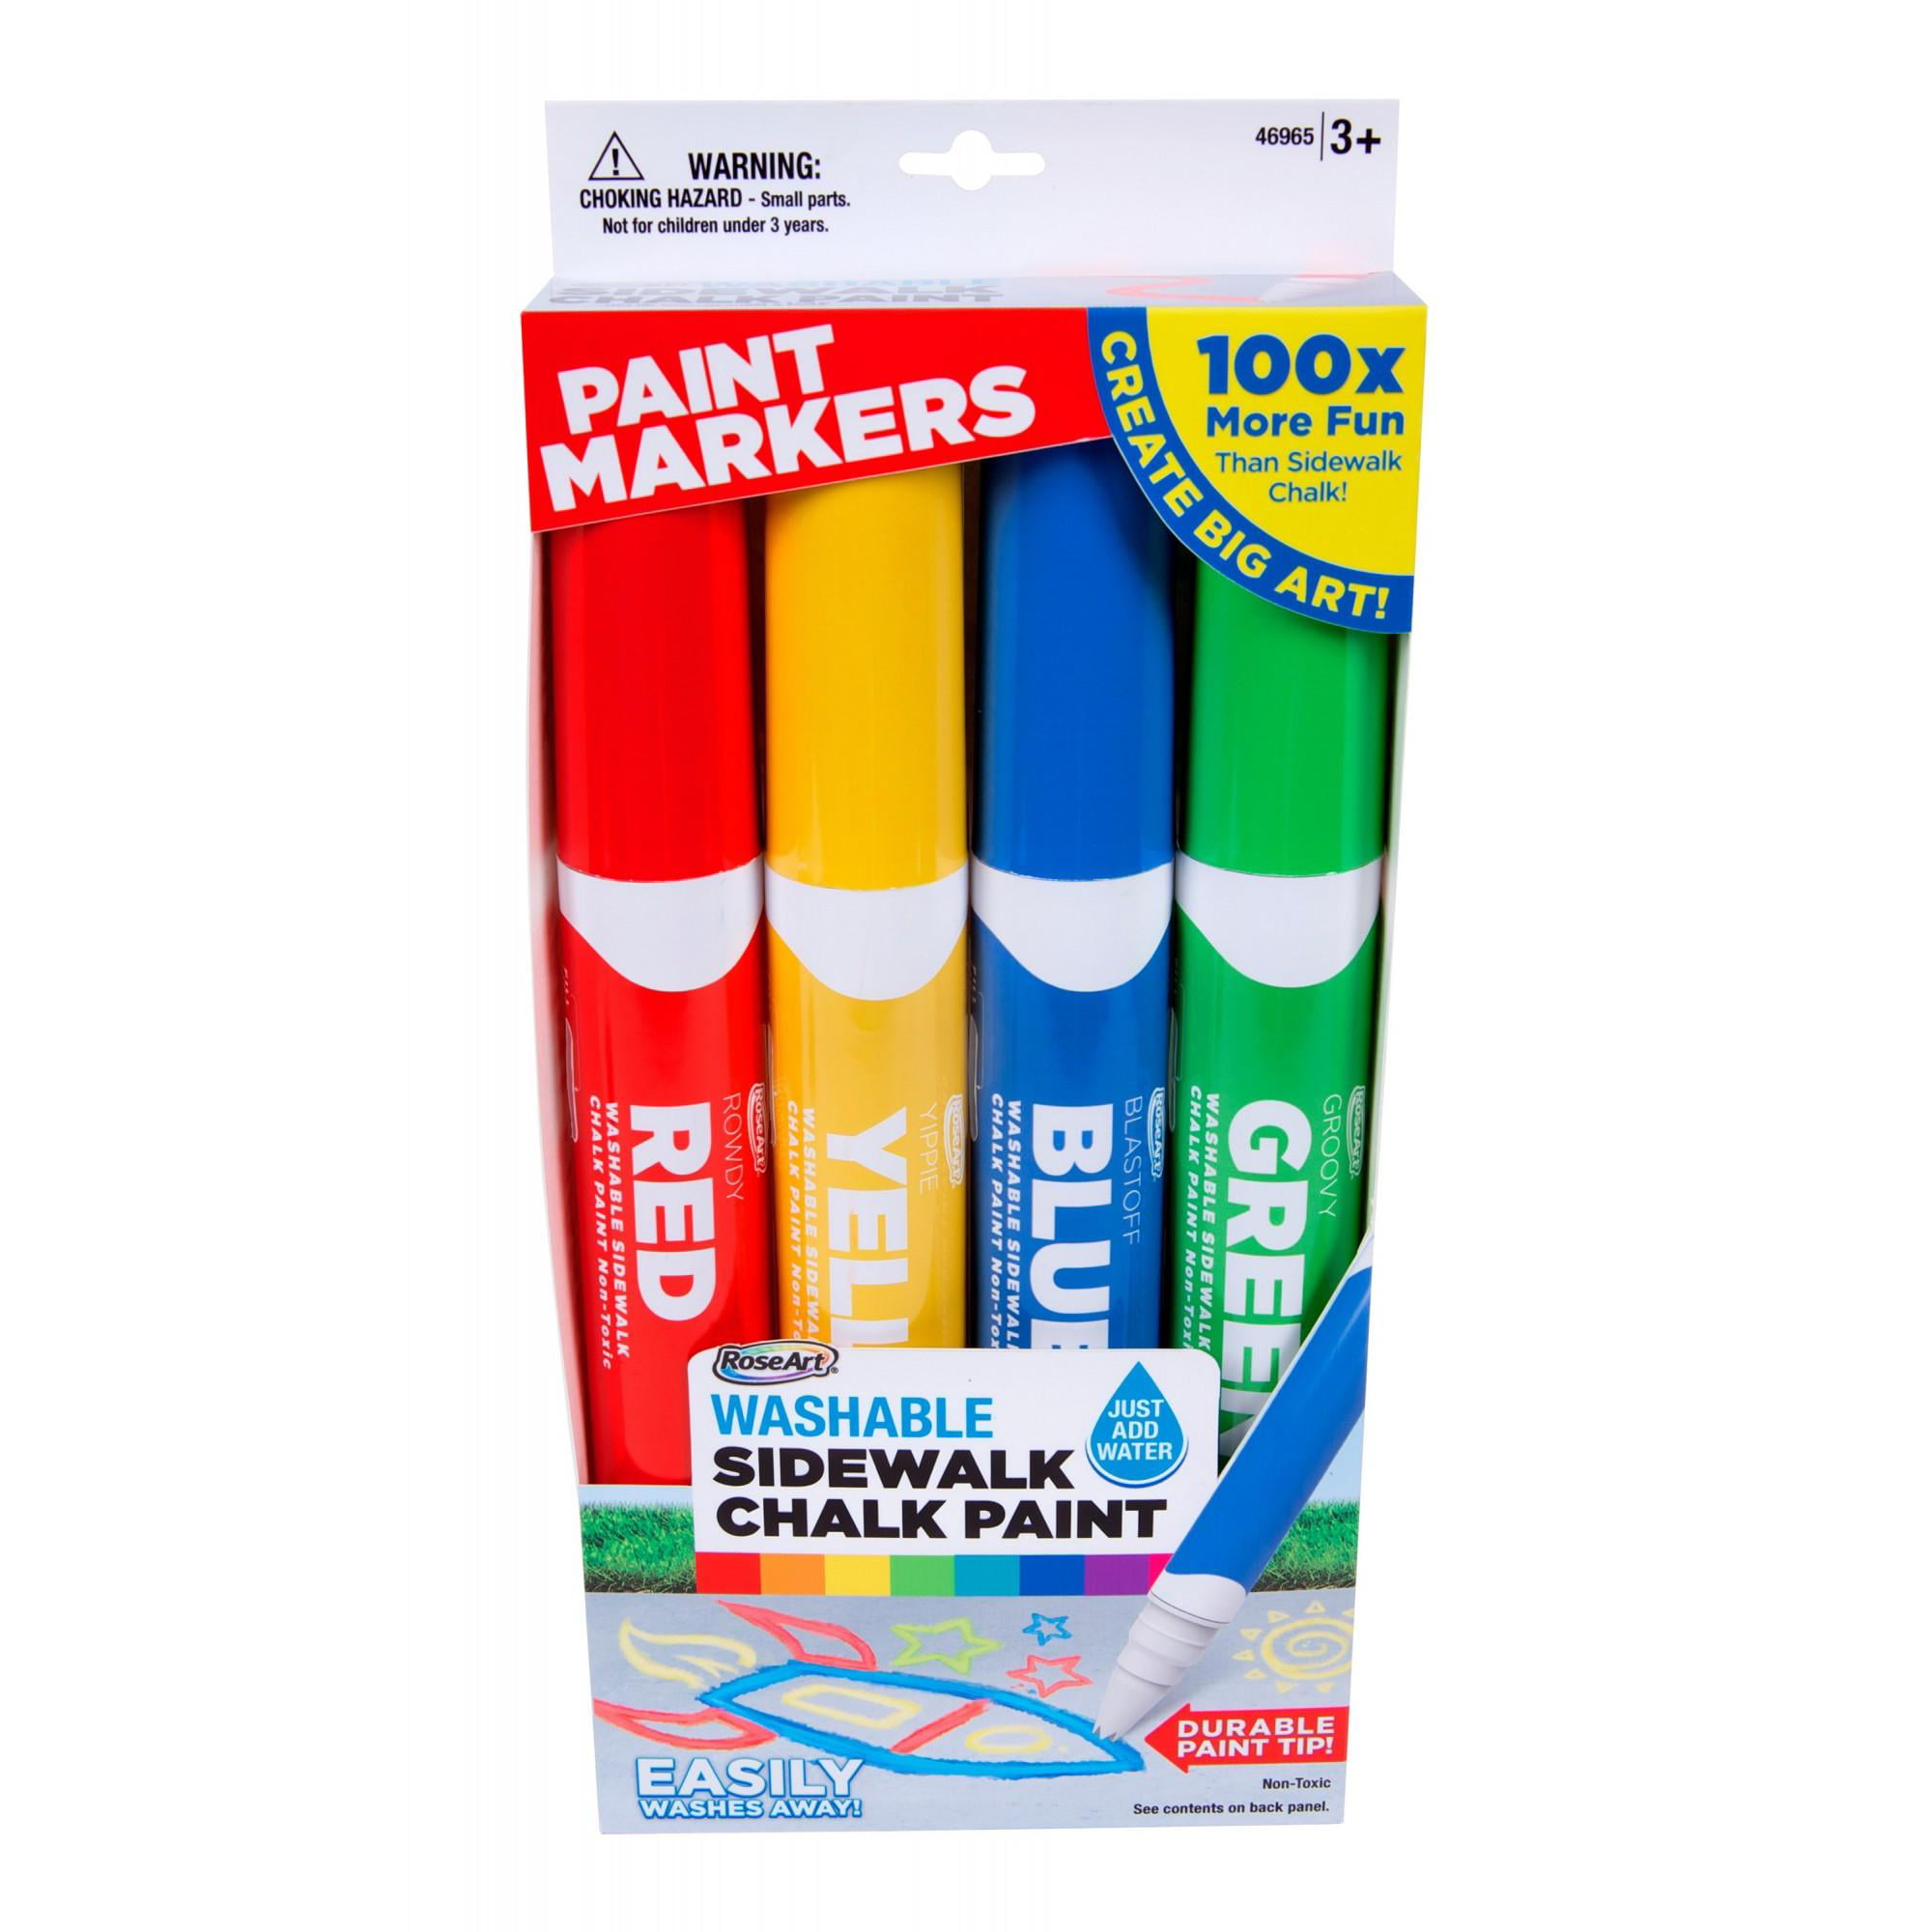 RoseArt Washable Sidewalk Neon Paint Markers, 1 ct - Smith's Food and Drug